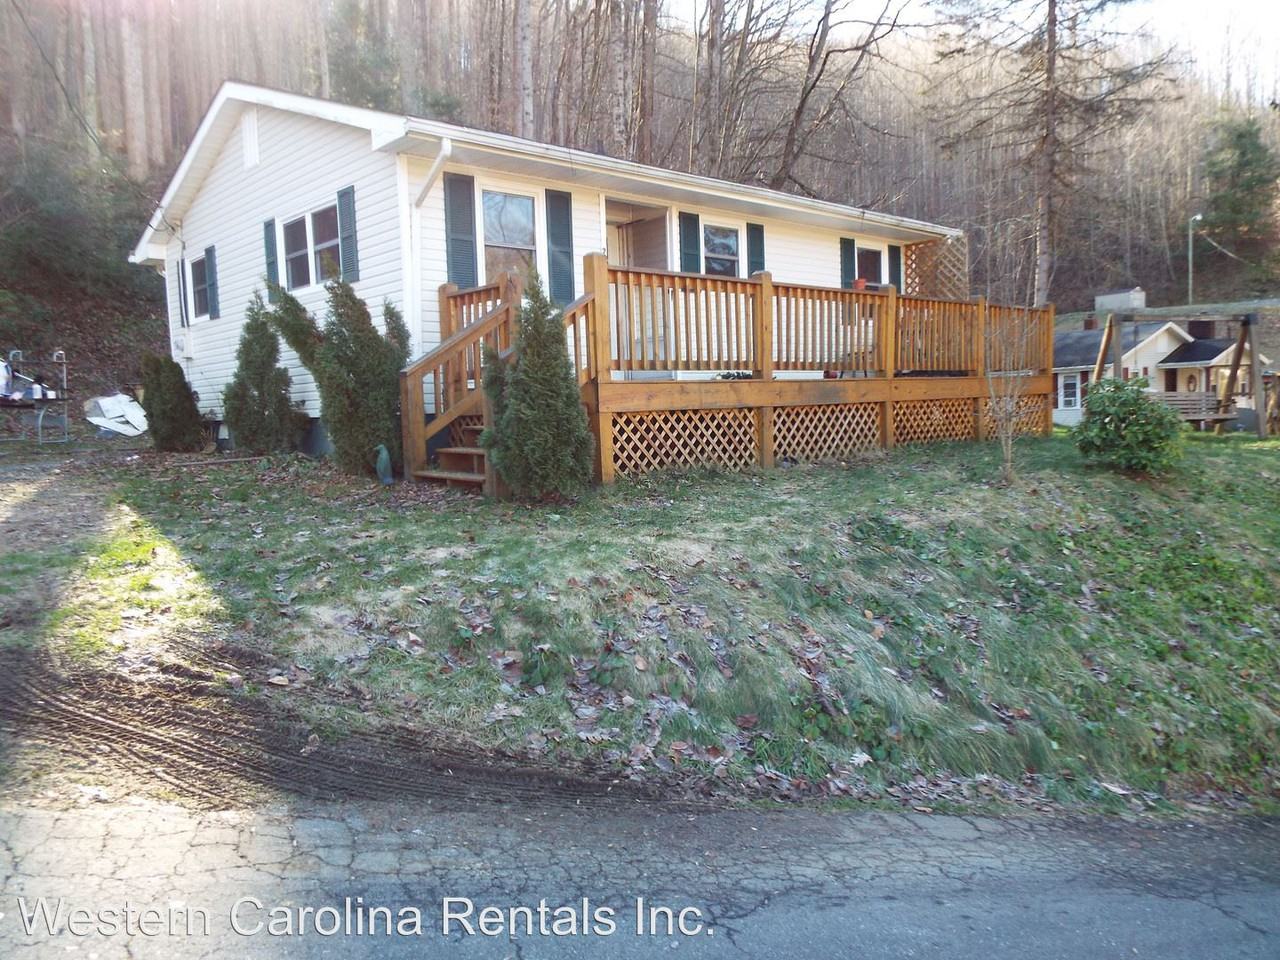 21 Red Bridge Ln, Sylva, NC 28779 2 Bedroom House for Rent for $900